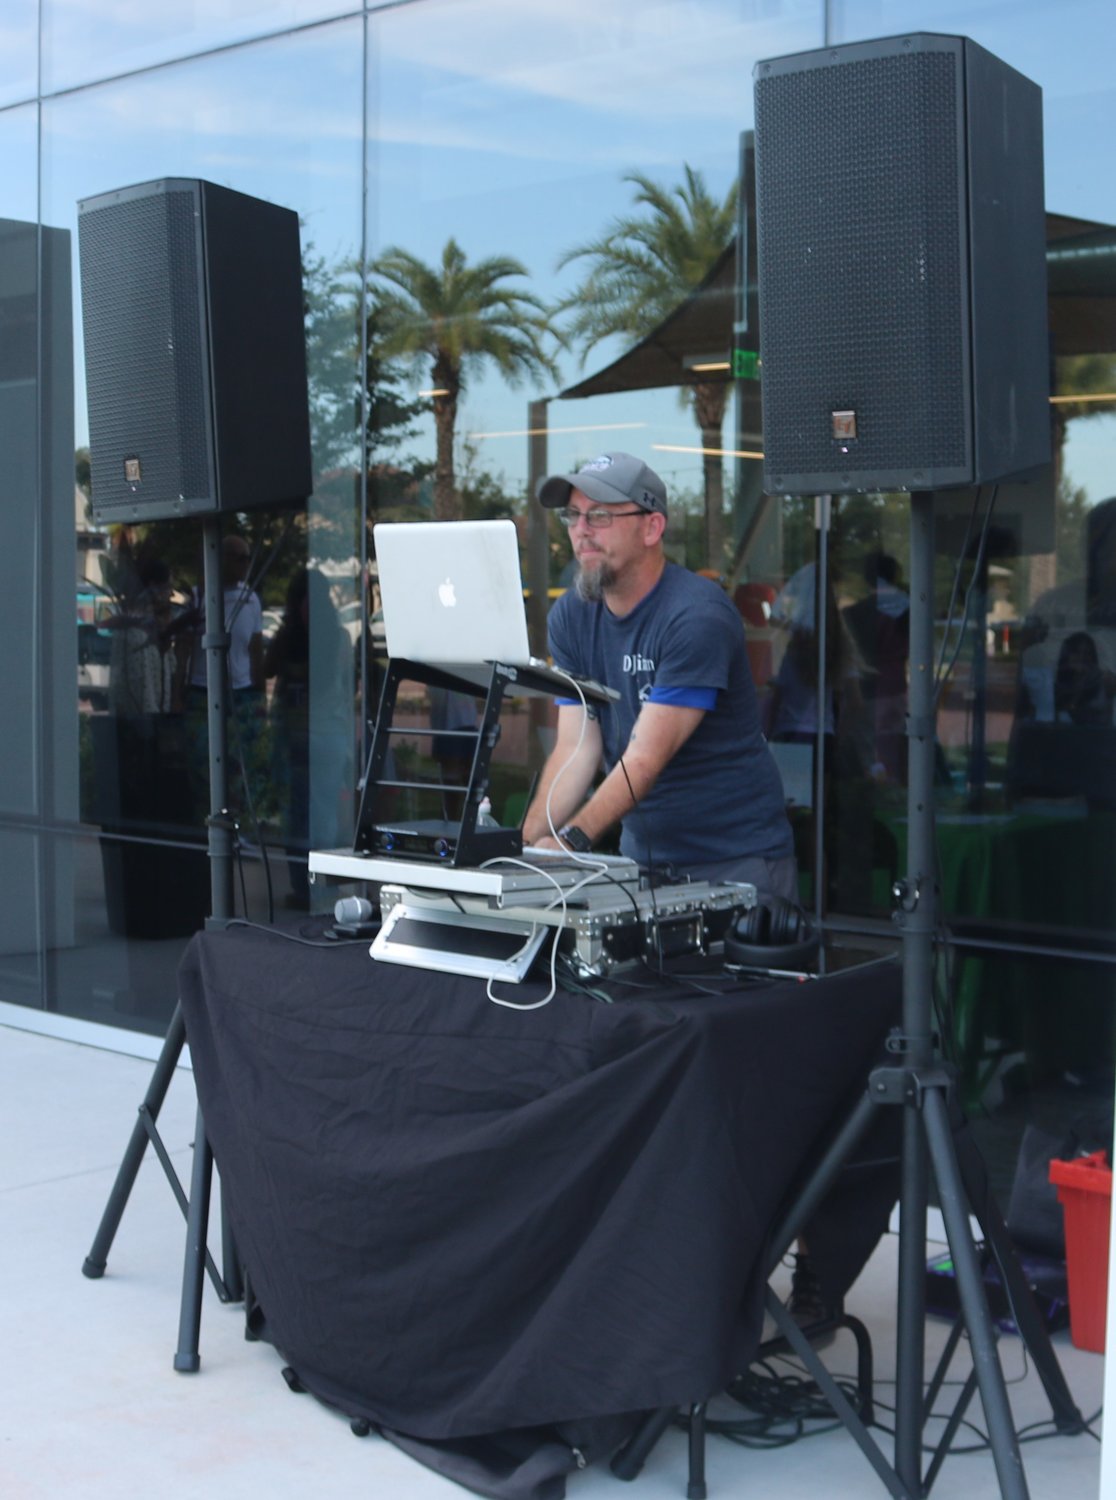 A DJ had everyone dancing between events at the link’s Family Olympics on Friday, July 15.